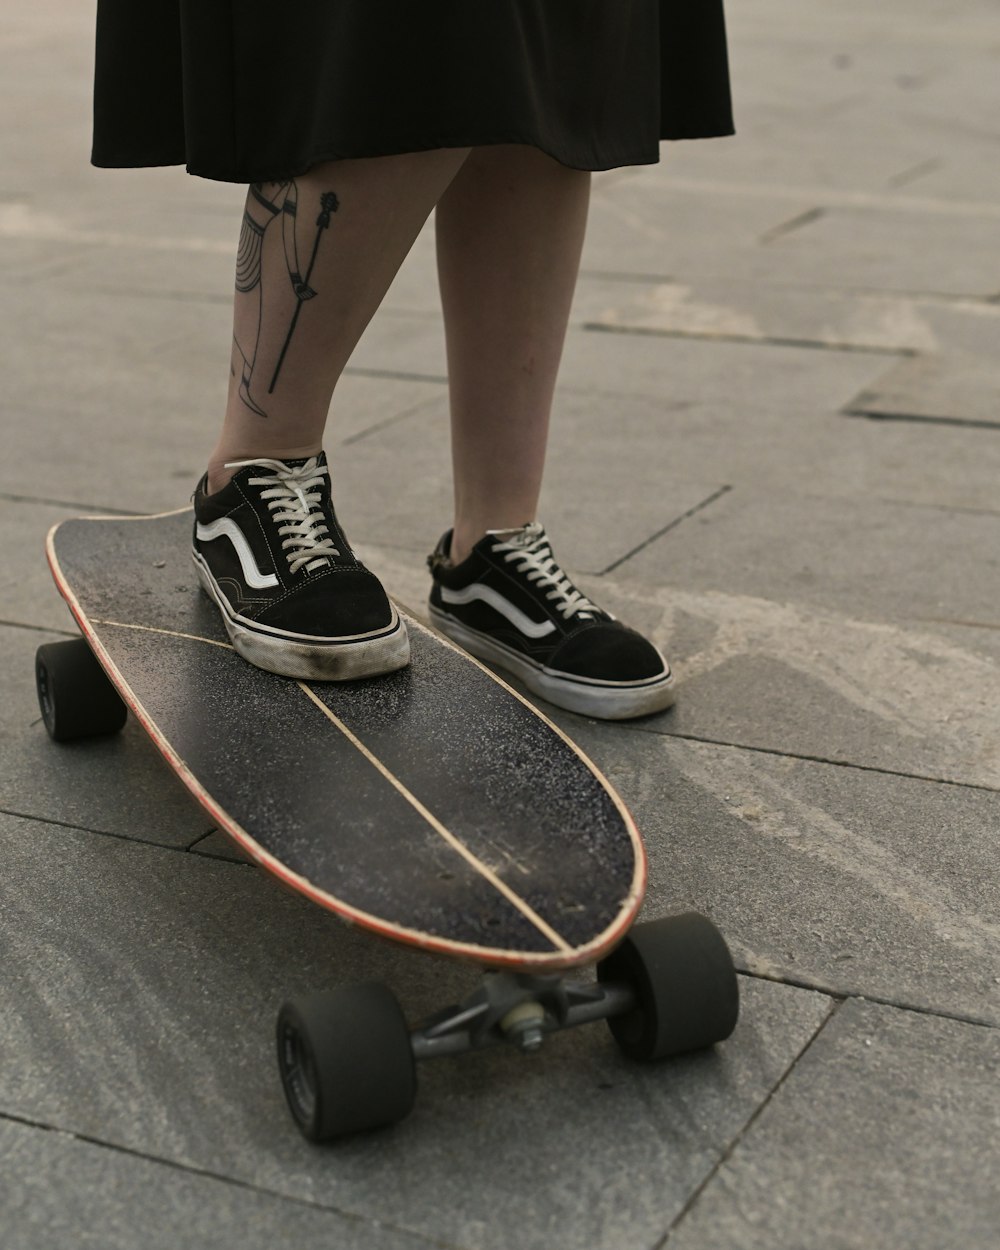 a person stands on a skateboard